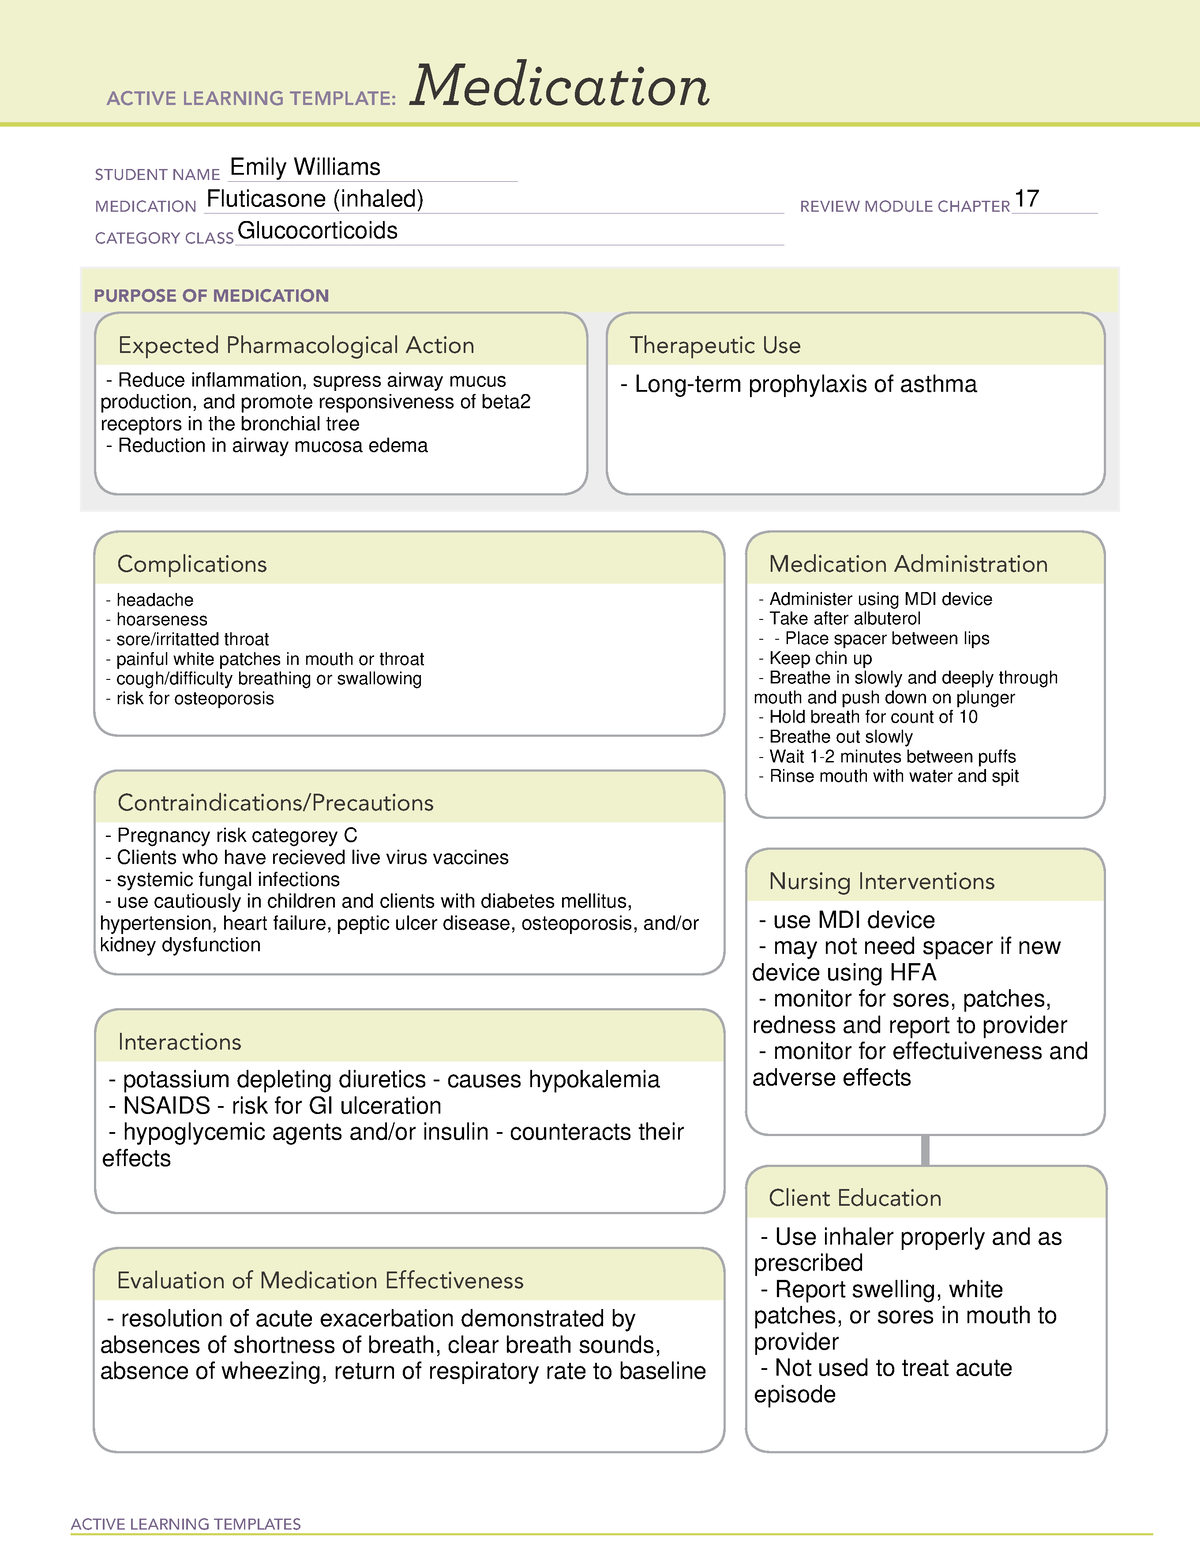 fluticasone-template-active-learning-templates-medication-student